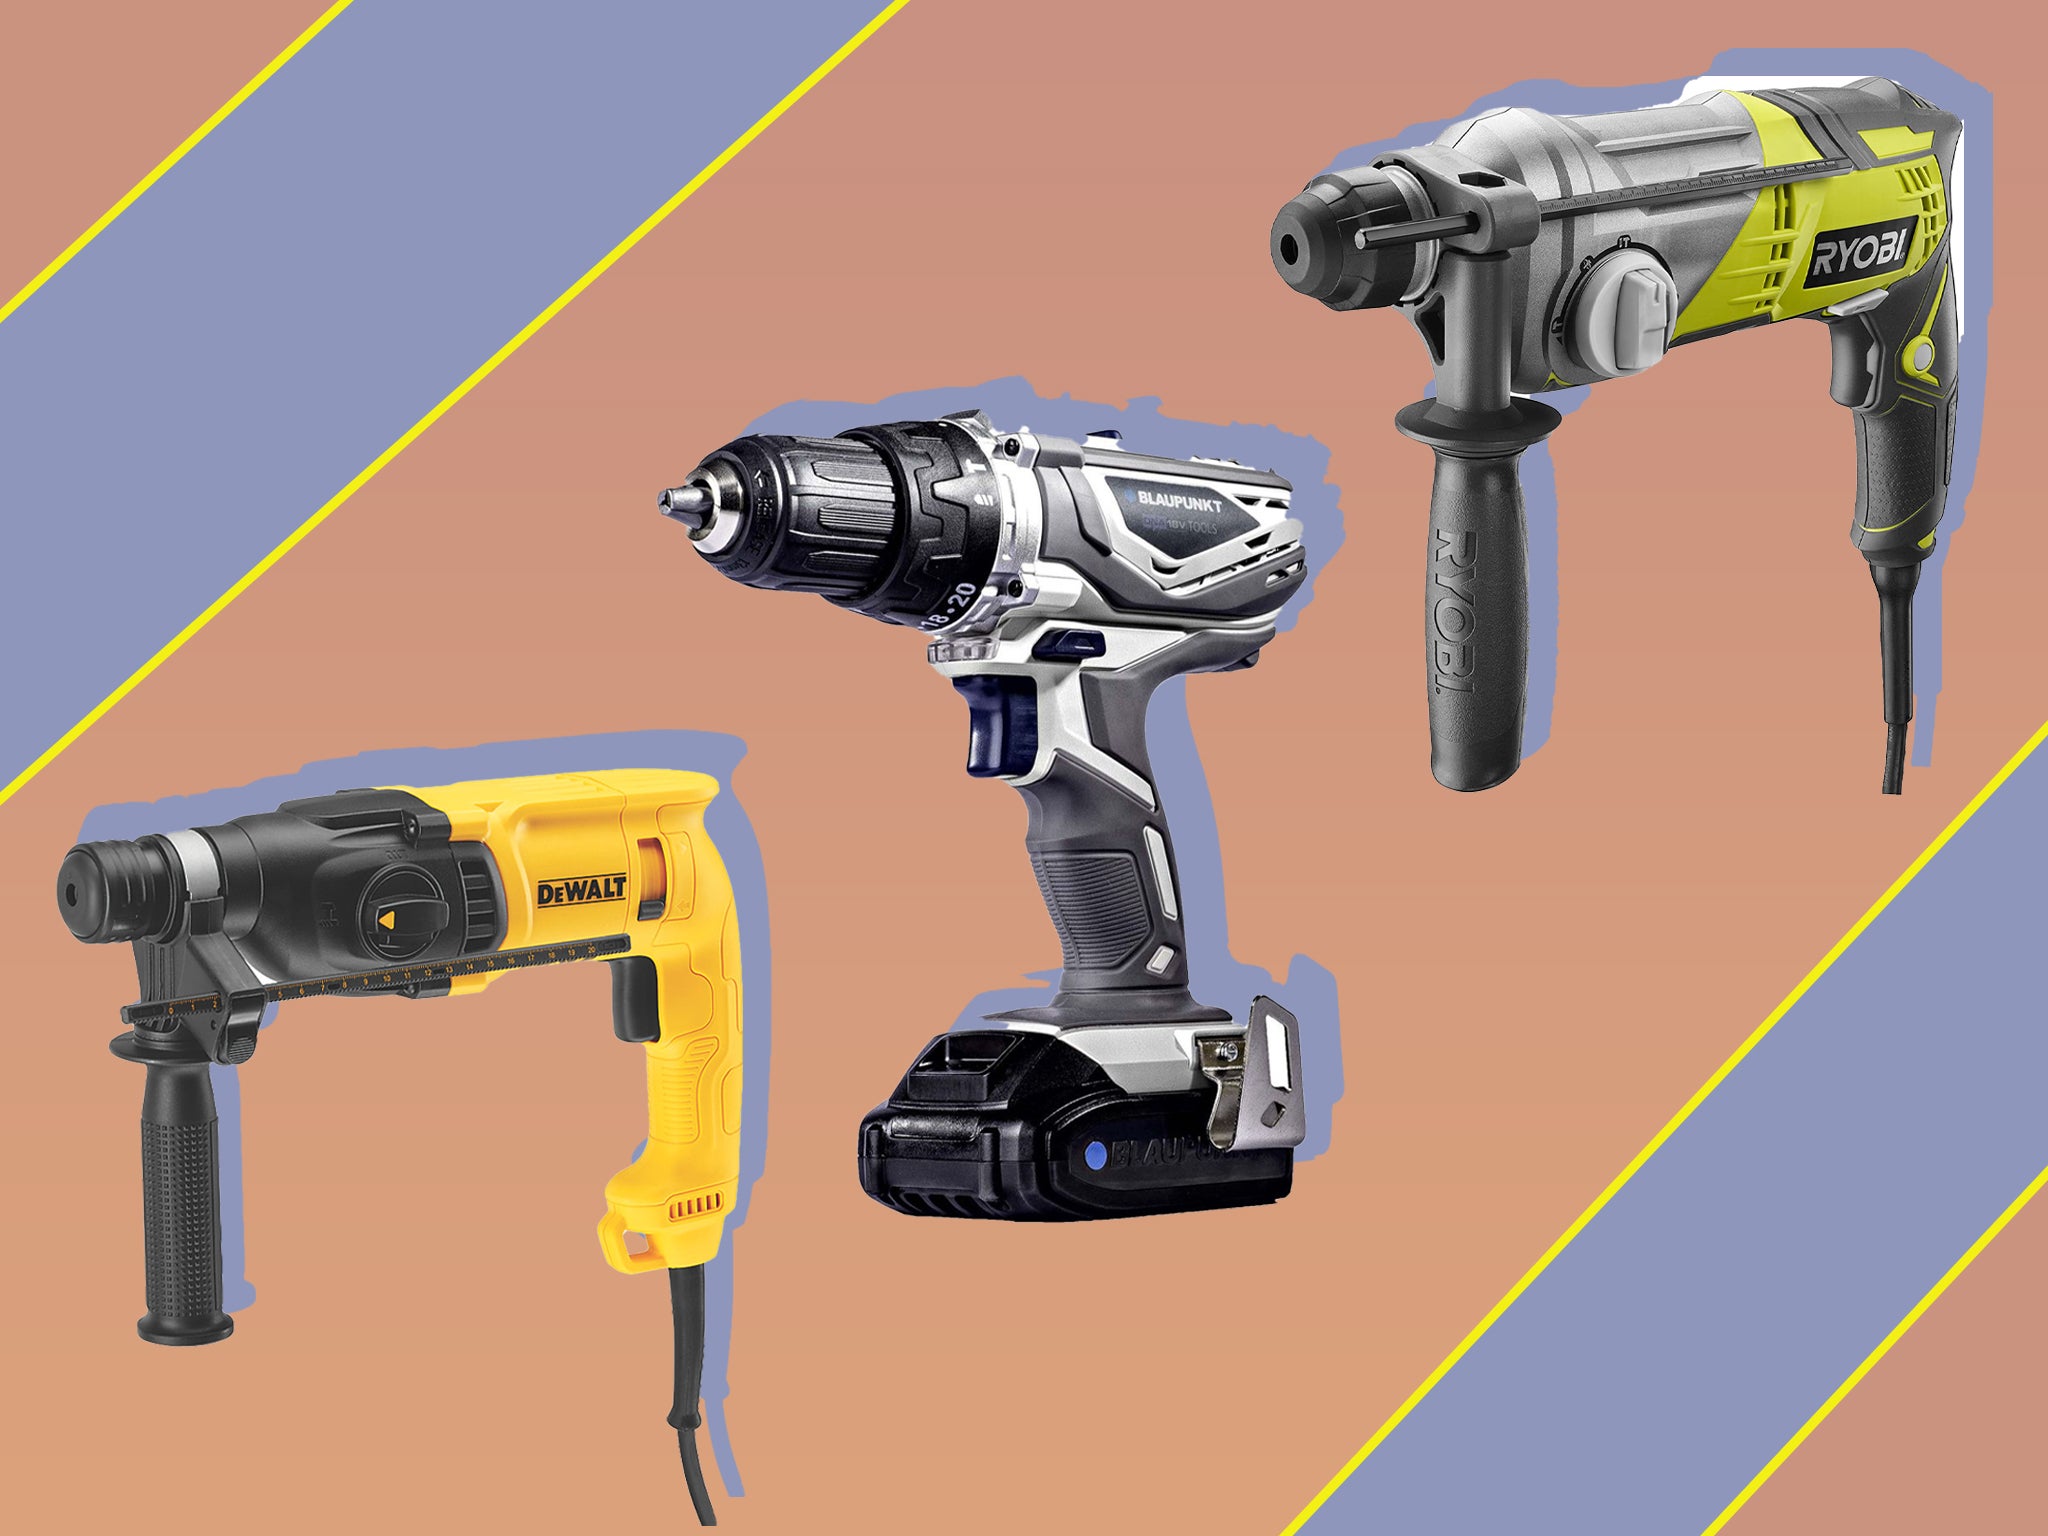 We’ve included both beginner friendly options and models for the more seasoned DIY enthusiasts